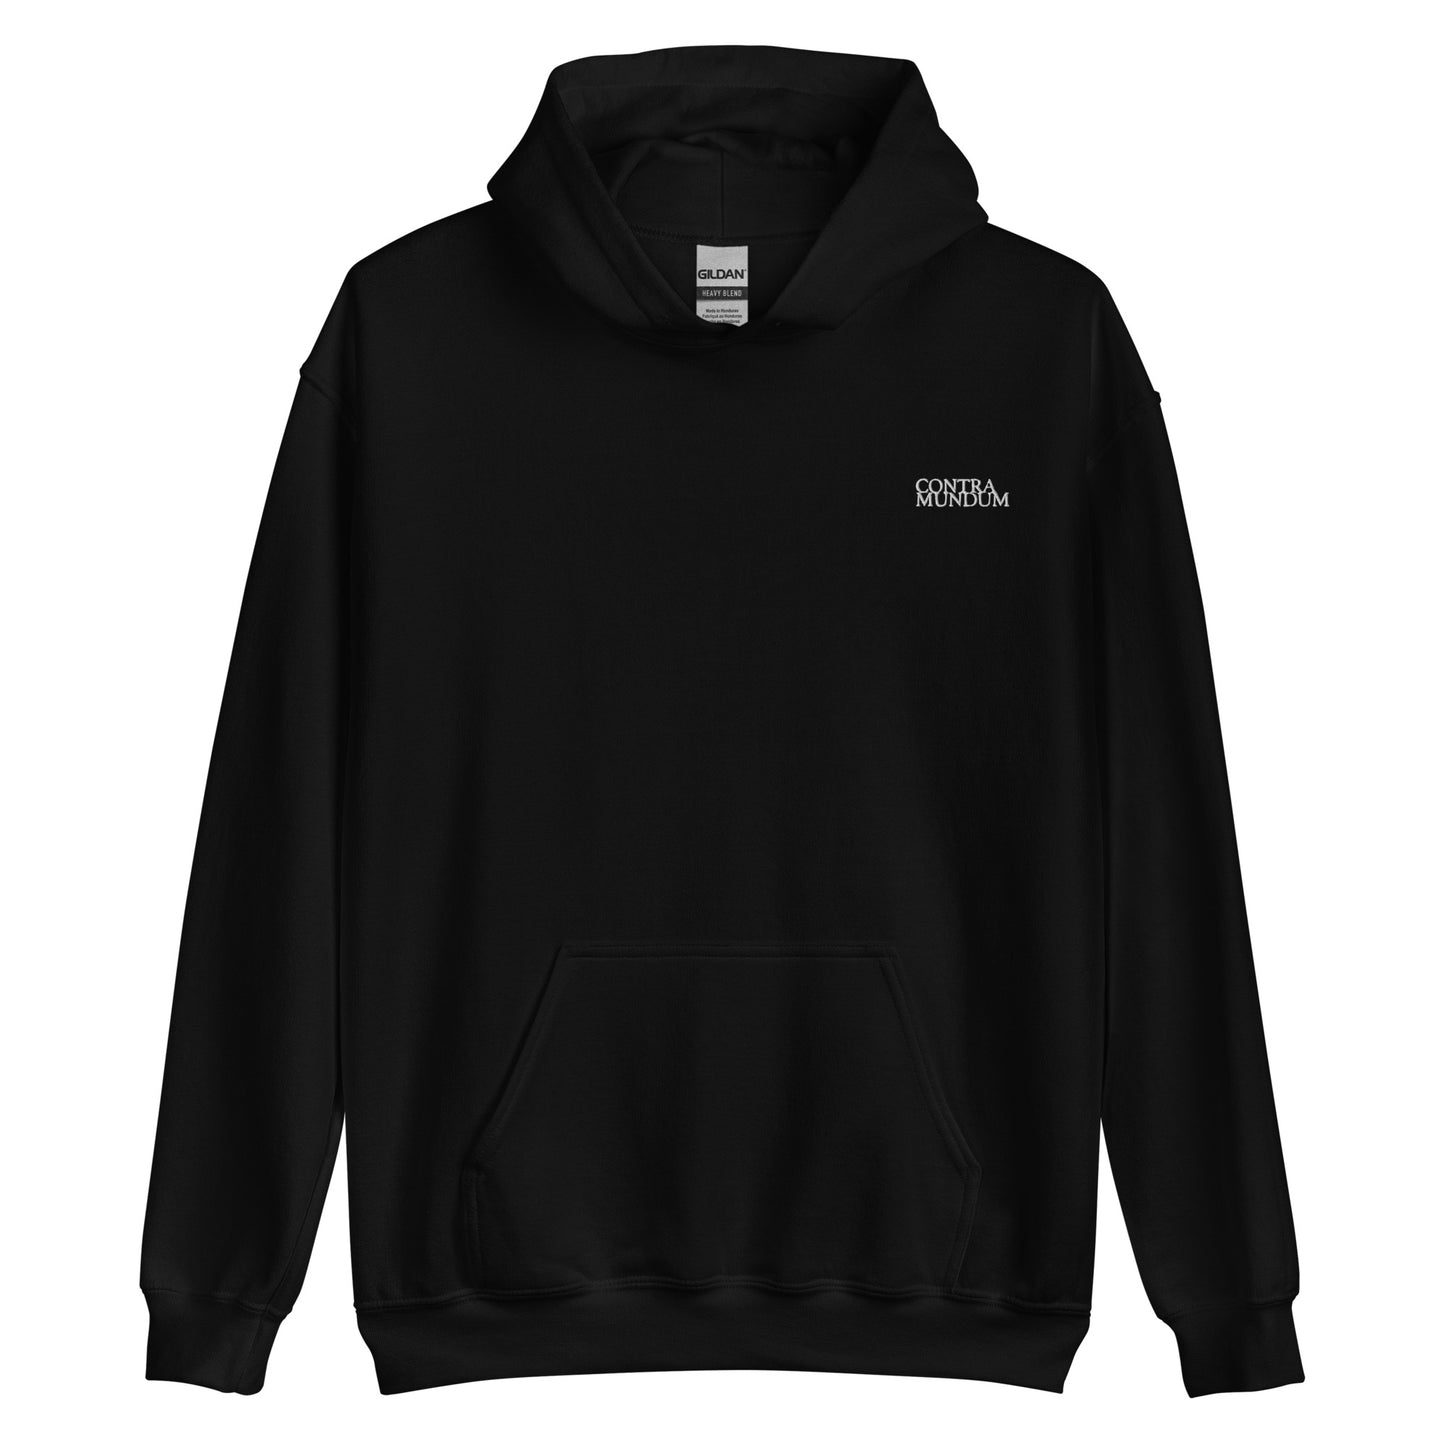 Bow To God. Not The Mob. | Men's Hoodie